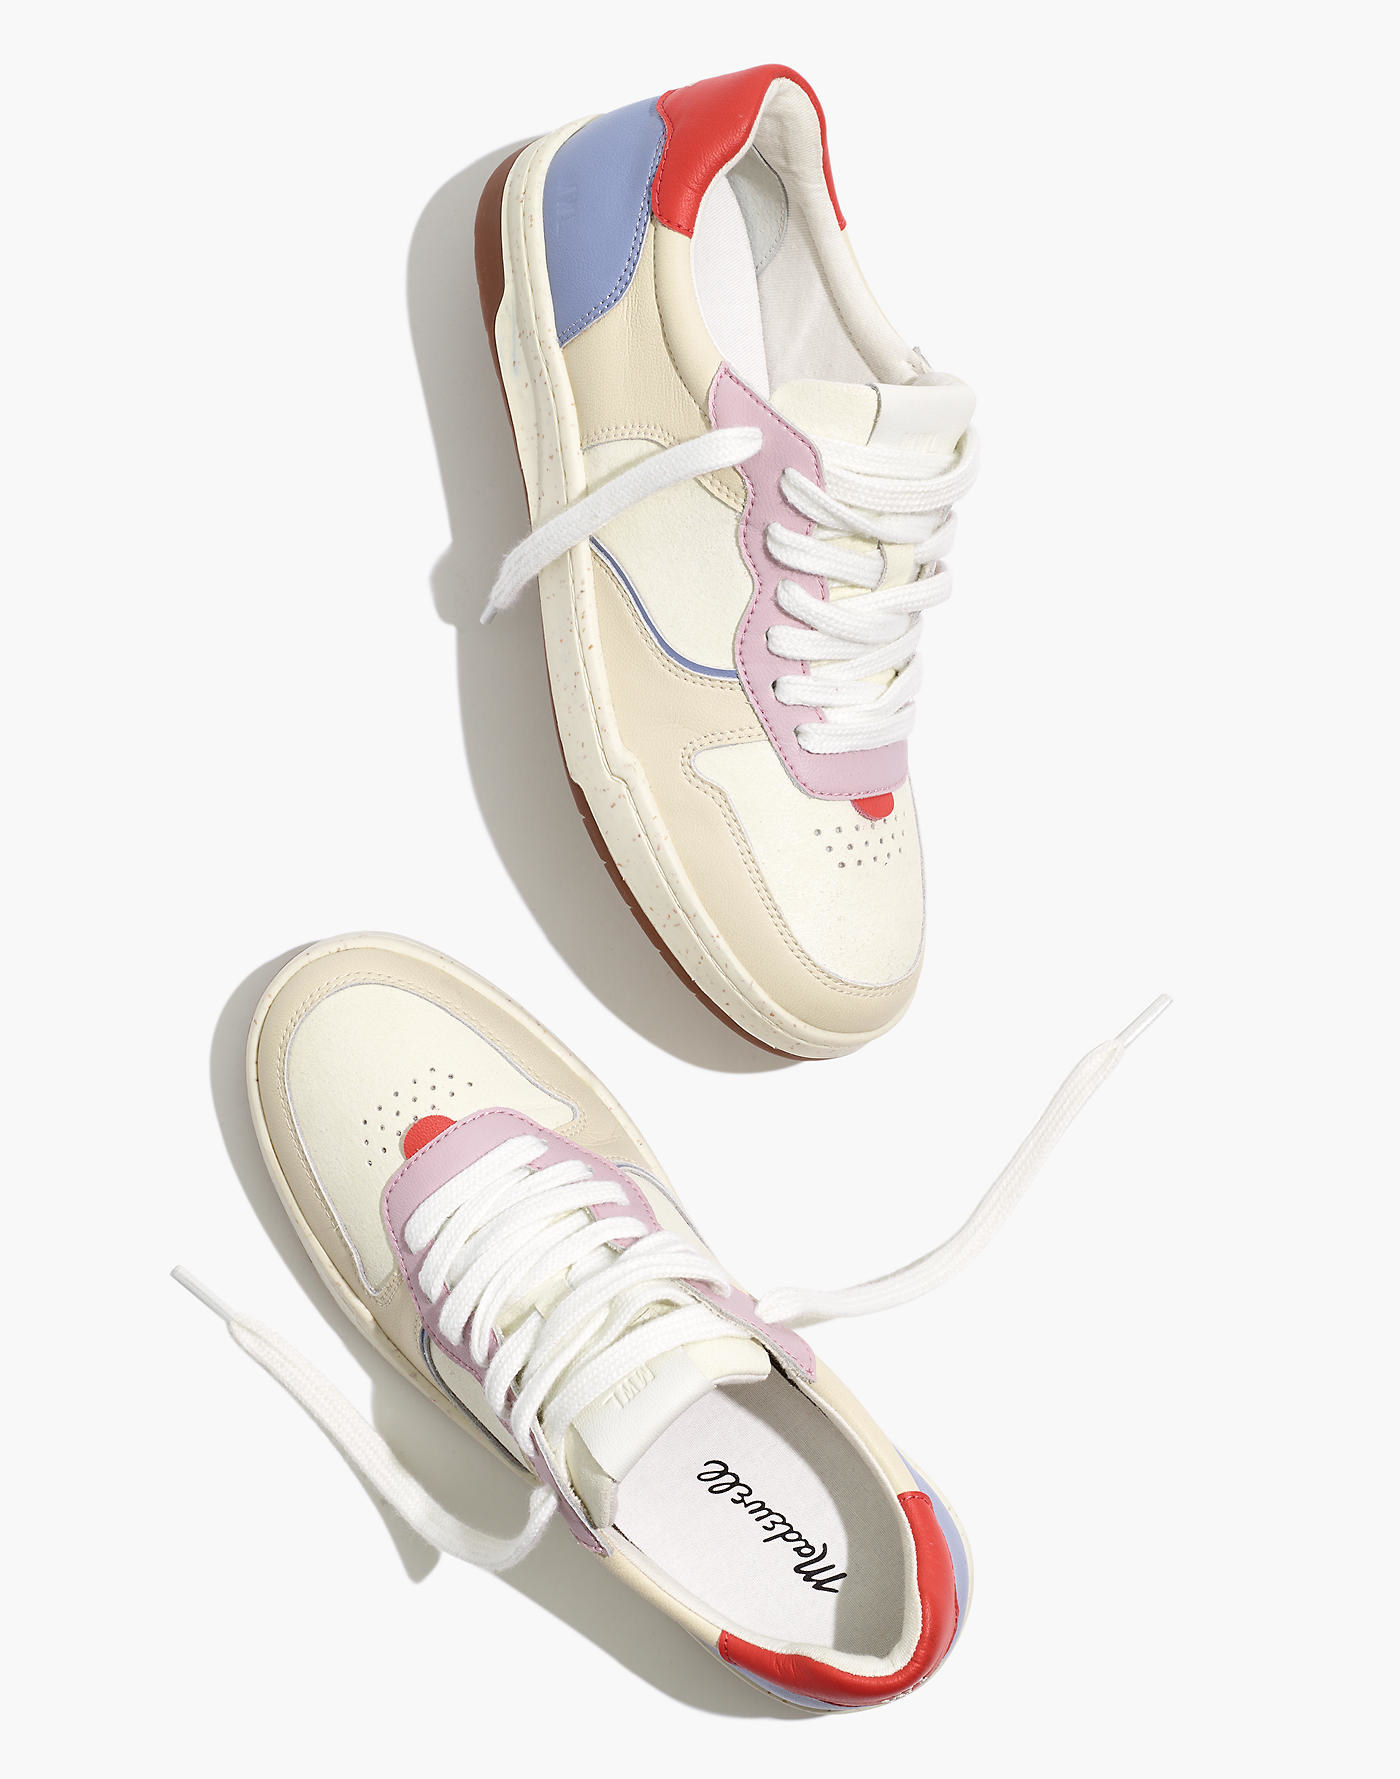 off white sneakers with pops of lilac, red, and blue color throuhgout 